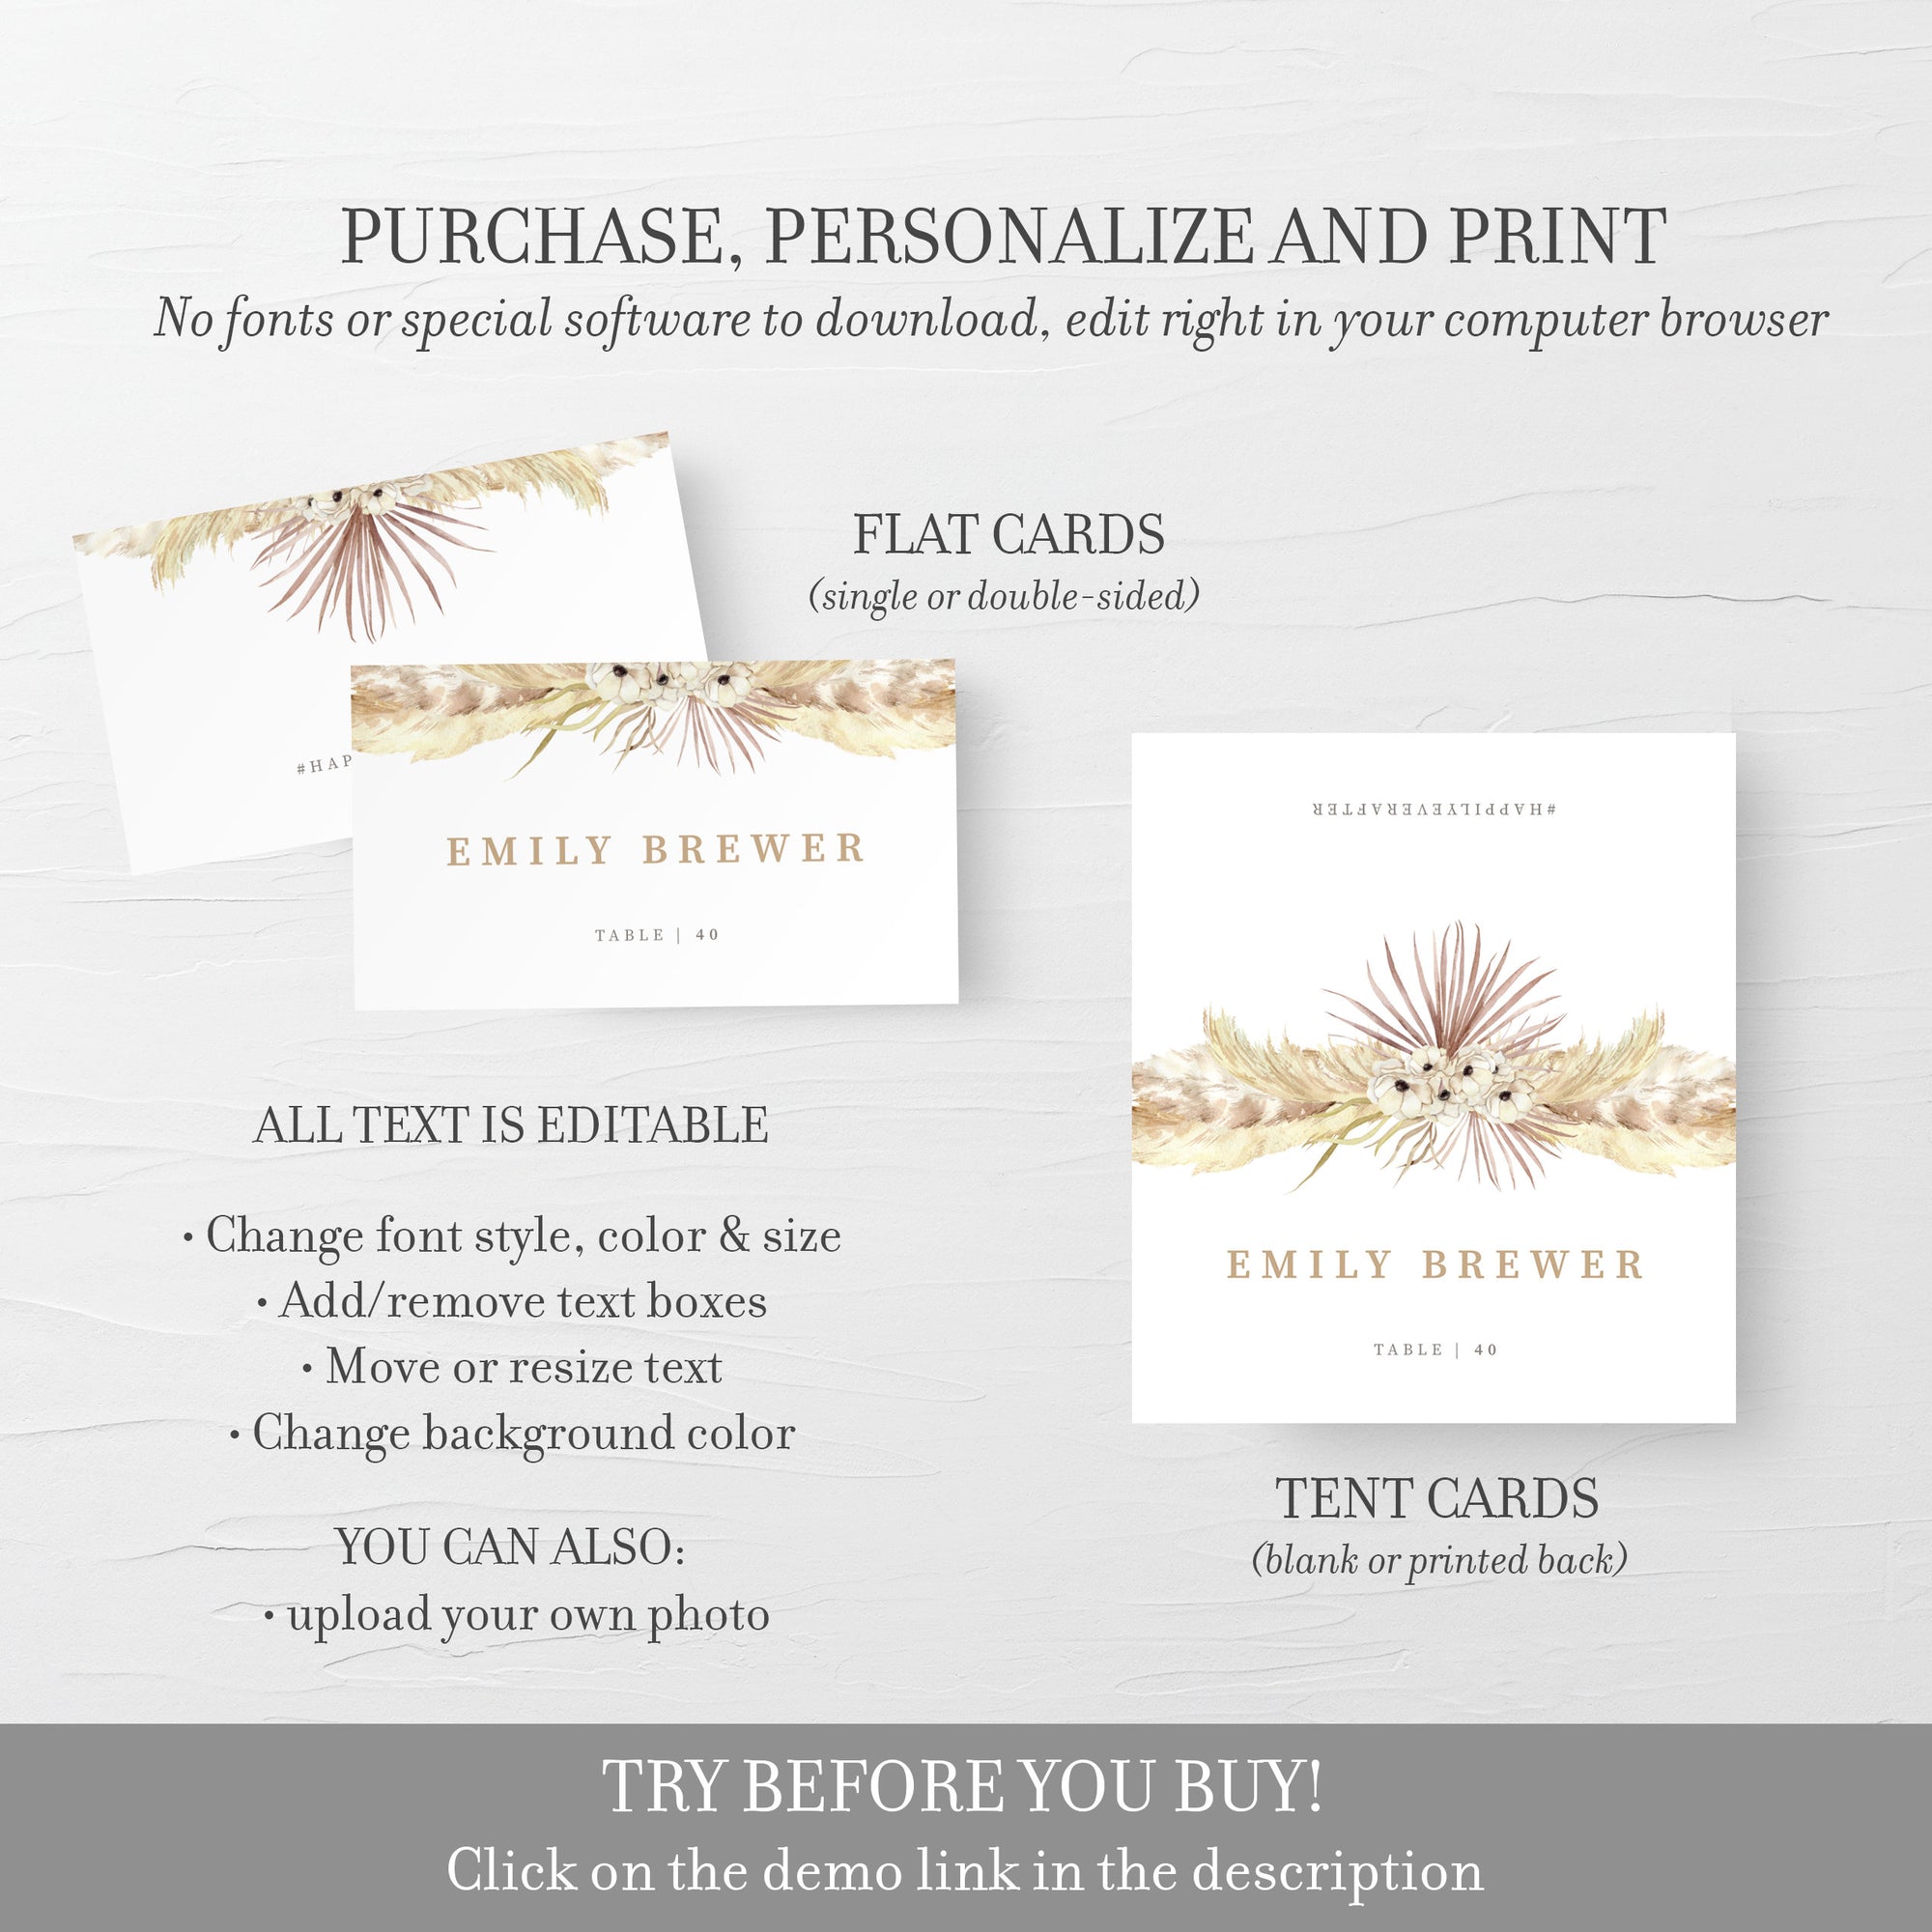 Pampas Place Card Template, Personalized Wedding Name Cards, Desert Boho Printable Place Cards, Dried Grass Editable DIGITAL DOWNLOAD DP100